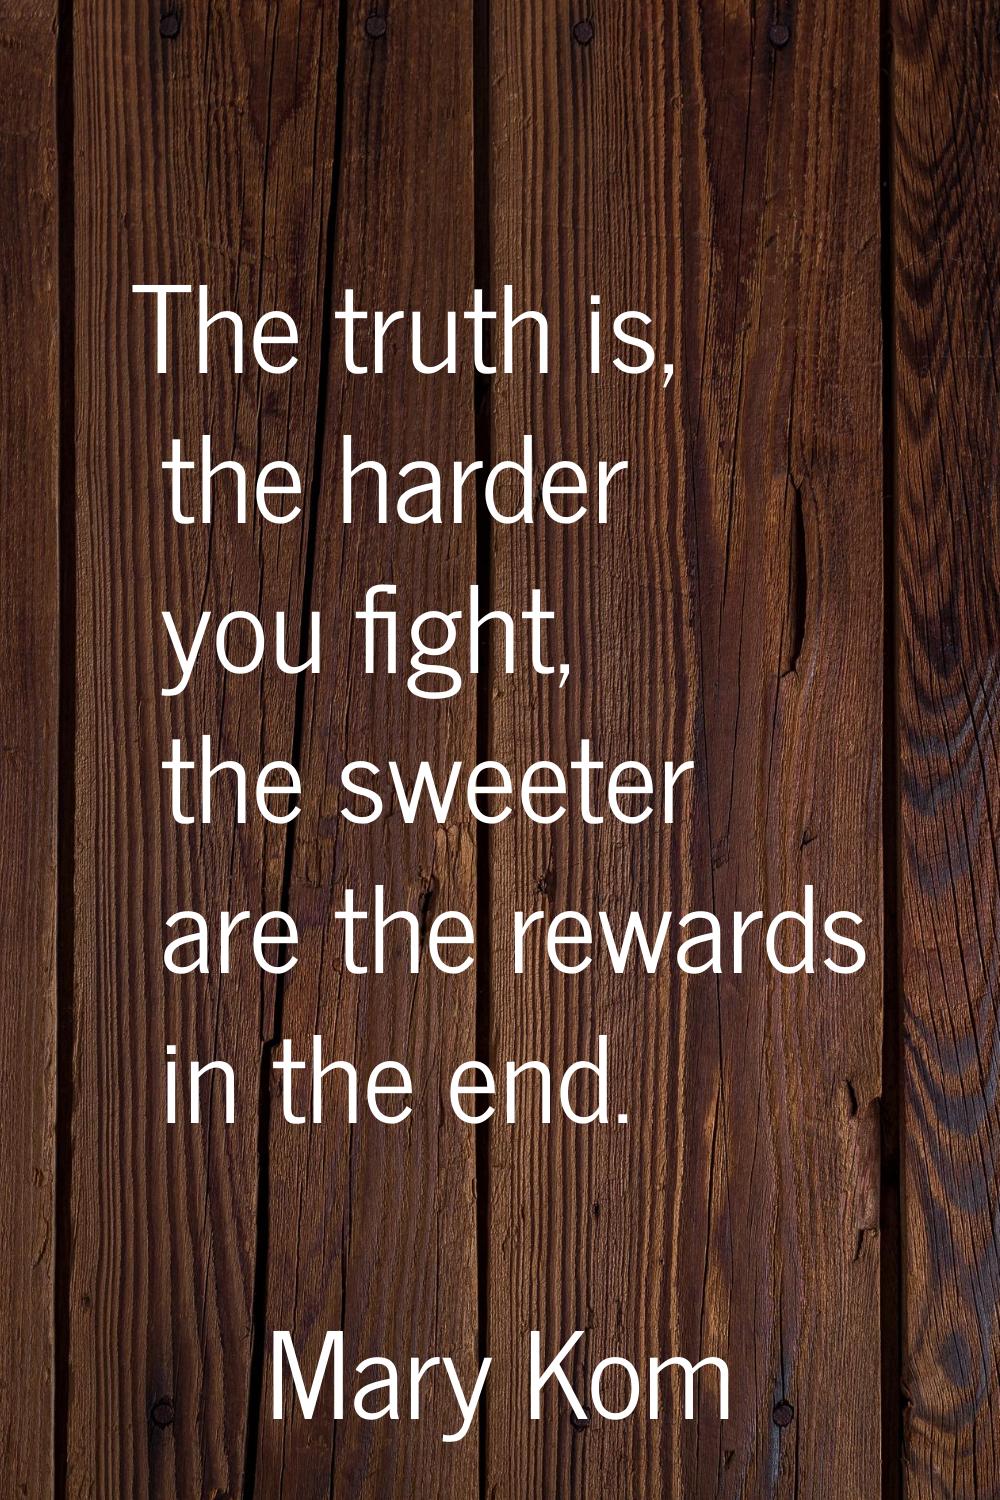 The truth is, the harder you fight, the sweeter are the rewards in the end.